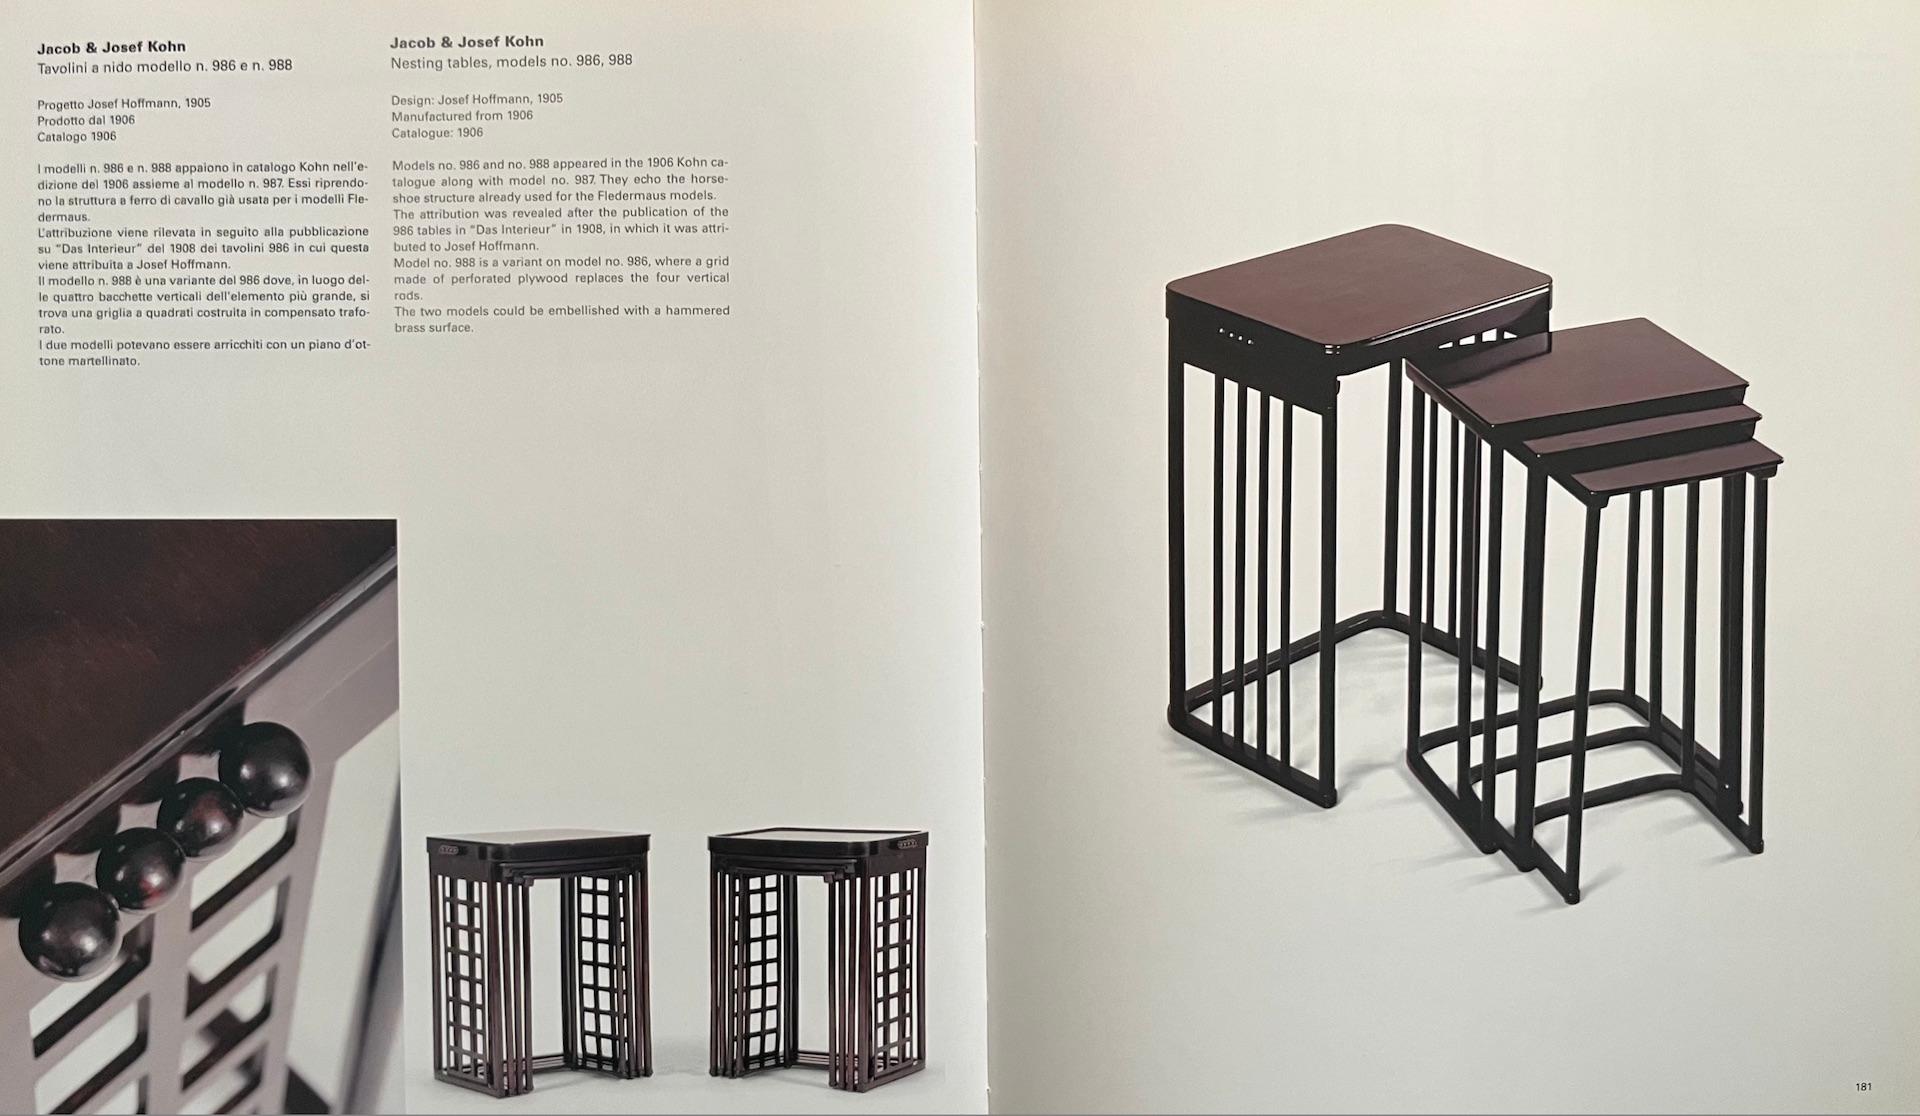 Early 20th Century Secessionistic Nestingtables by J. Hoffmann (1905) for J.J.Kohn, Model 986